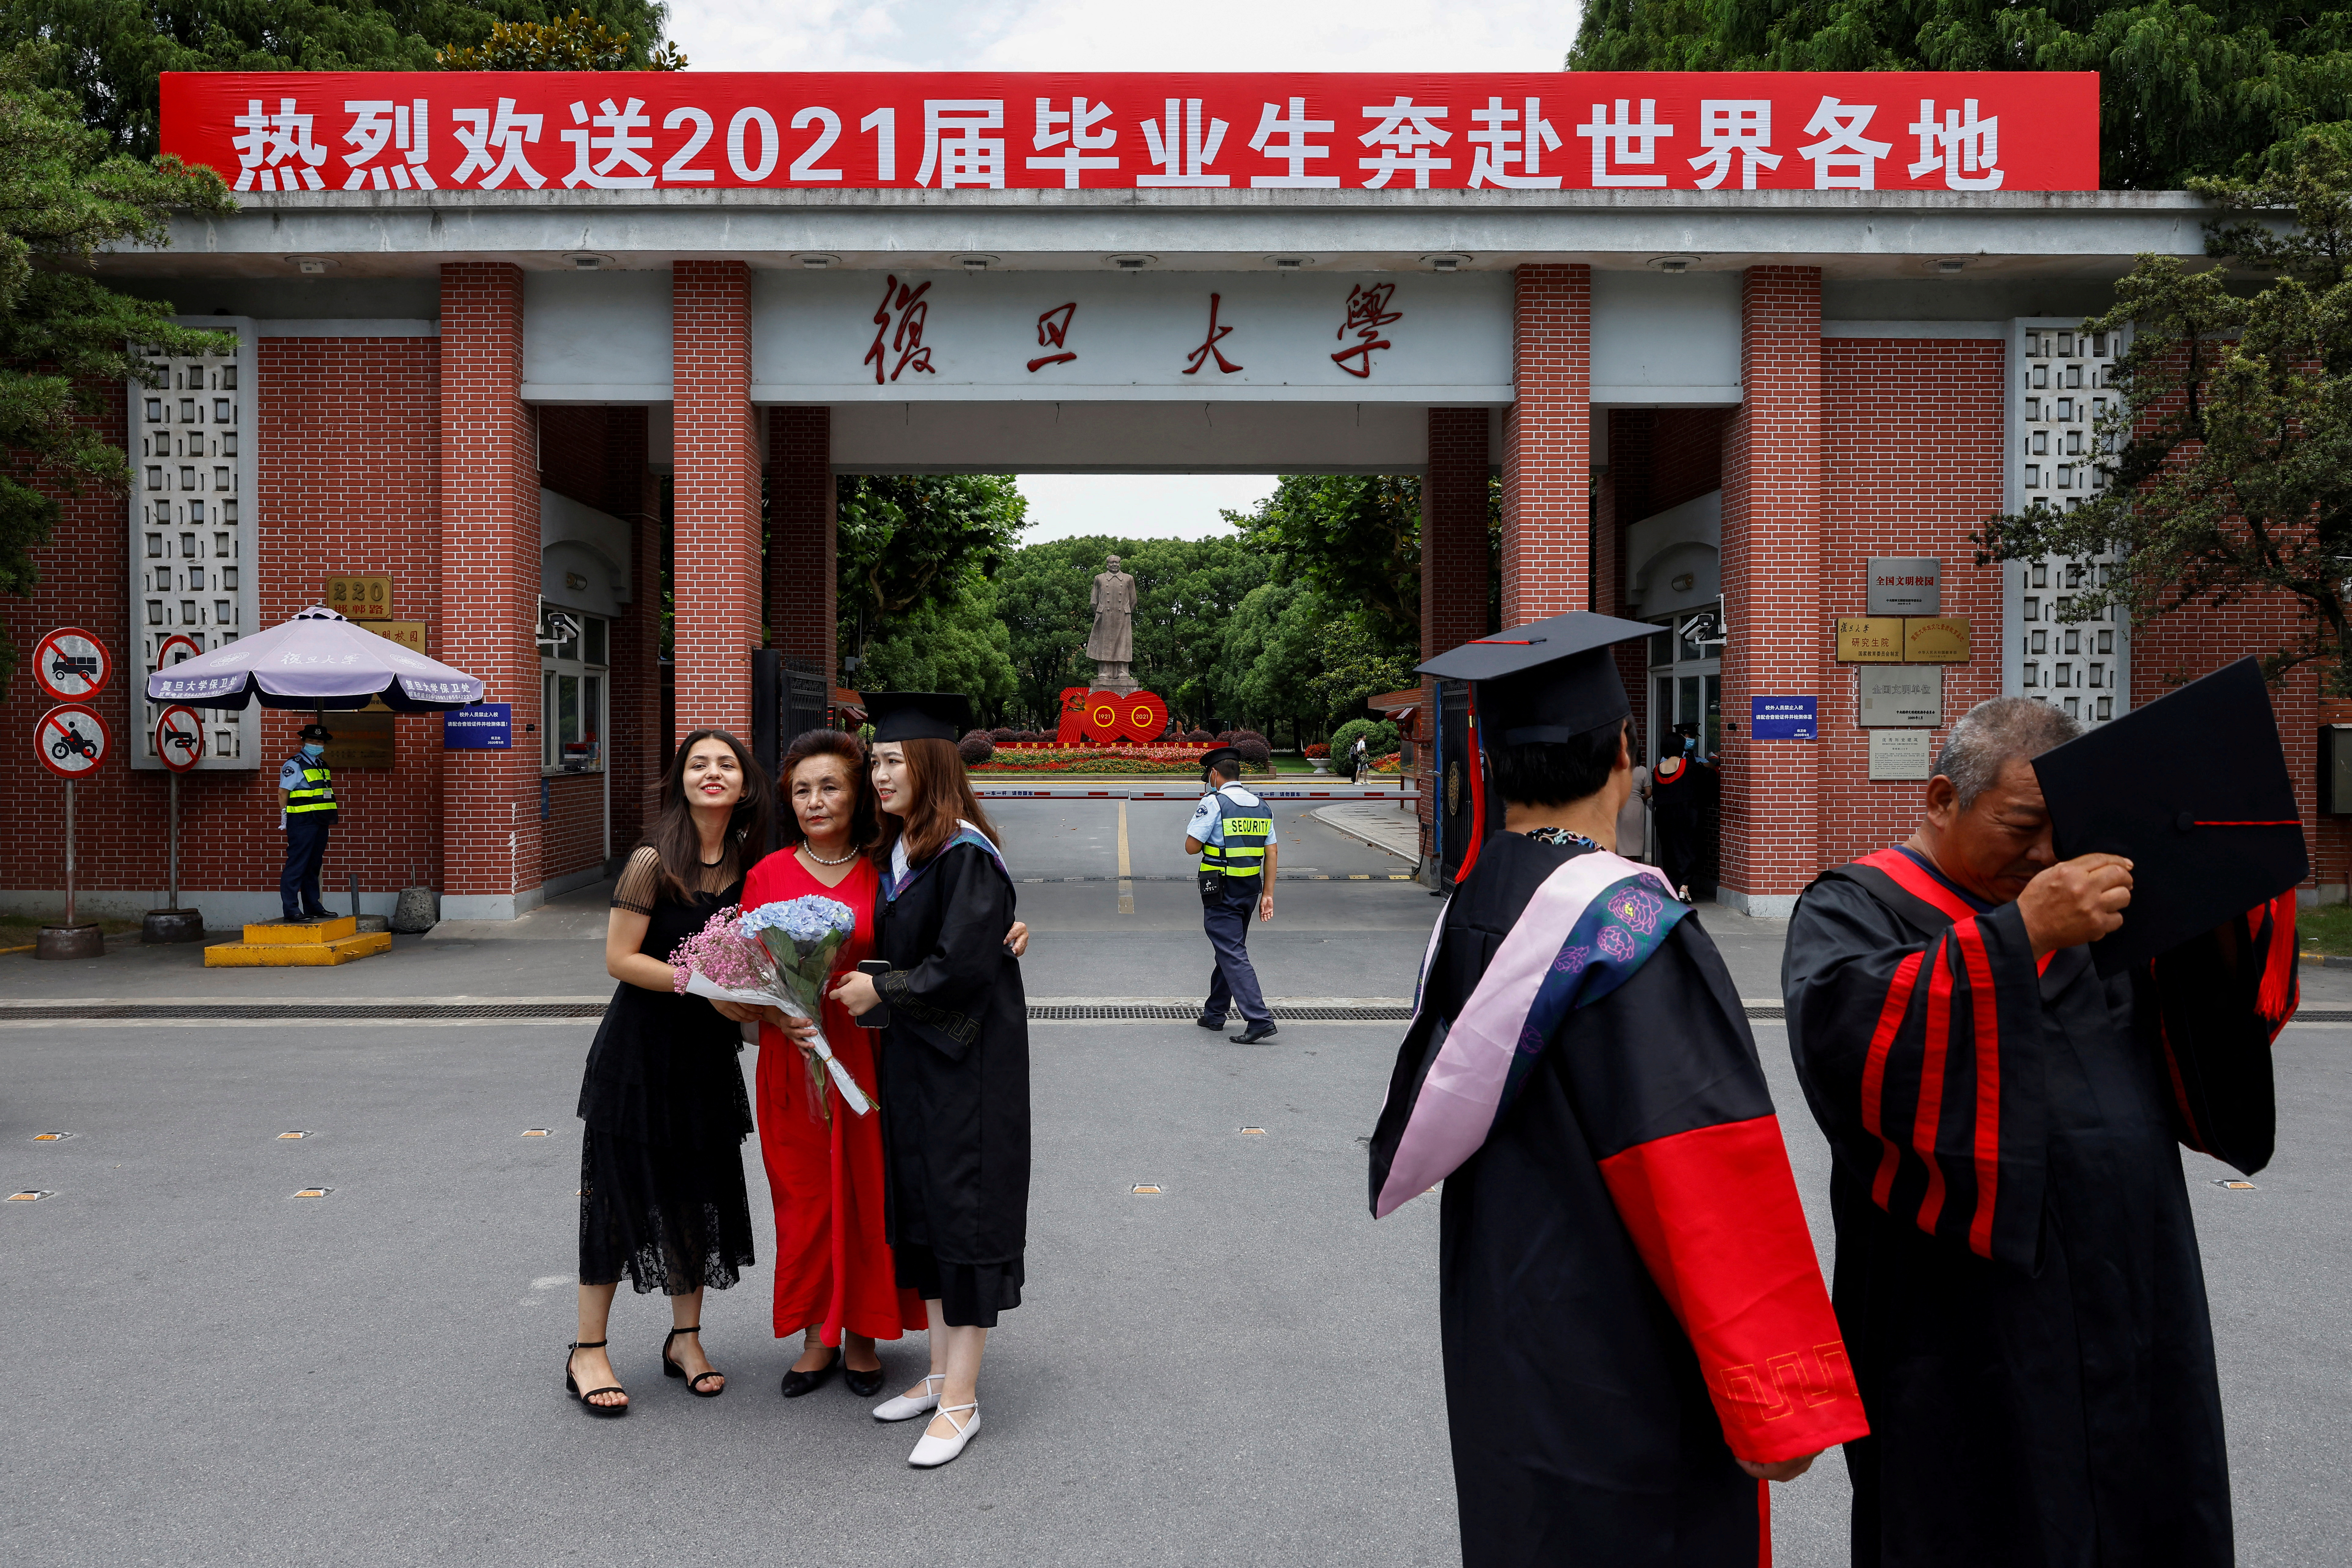 Students take graduation photo in front of the statue of Chinese leader Mao Zedong and a signboard marking the 100th founding anniversary of the Communist Party of China, at Fudan University in Shanghai